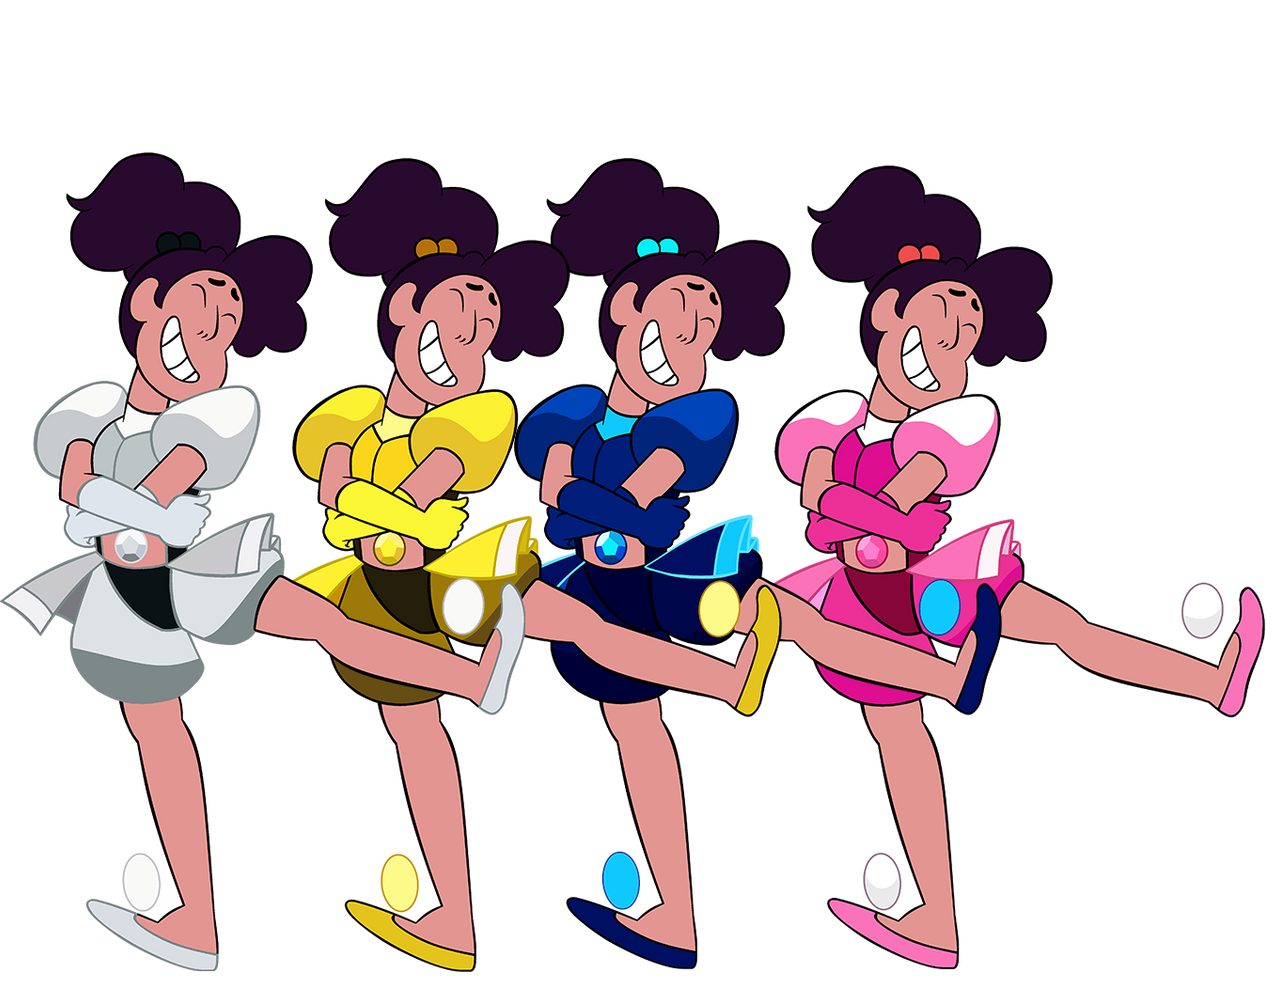 pink-diamond Stevonnie in other diamond colours by Masquerade-23 on  DeviantArt